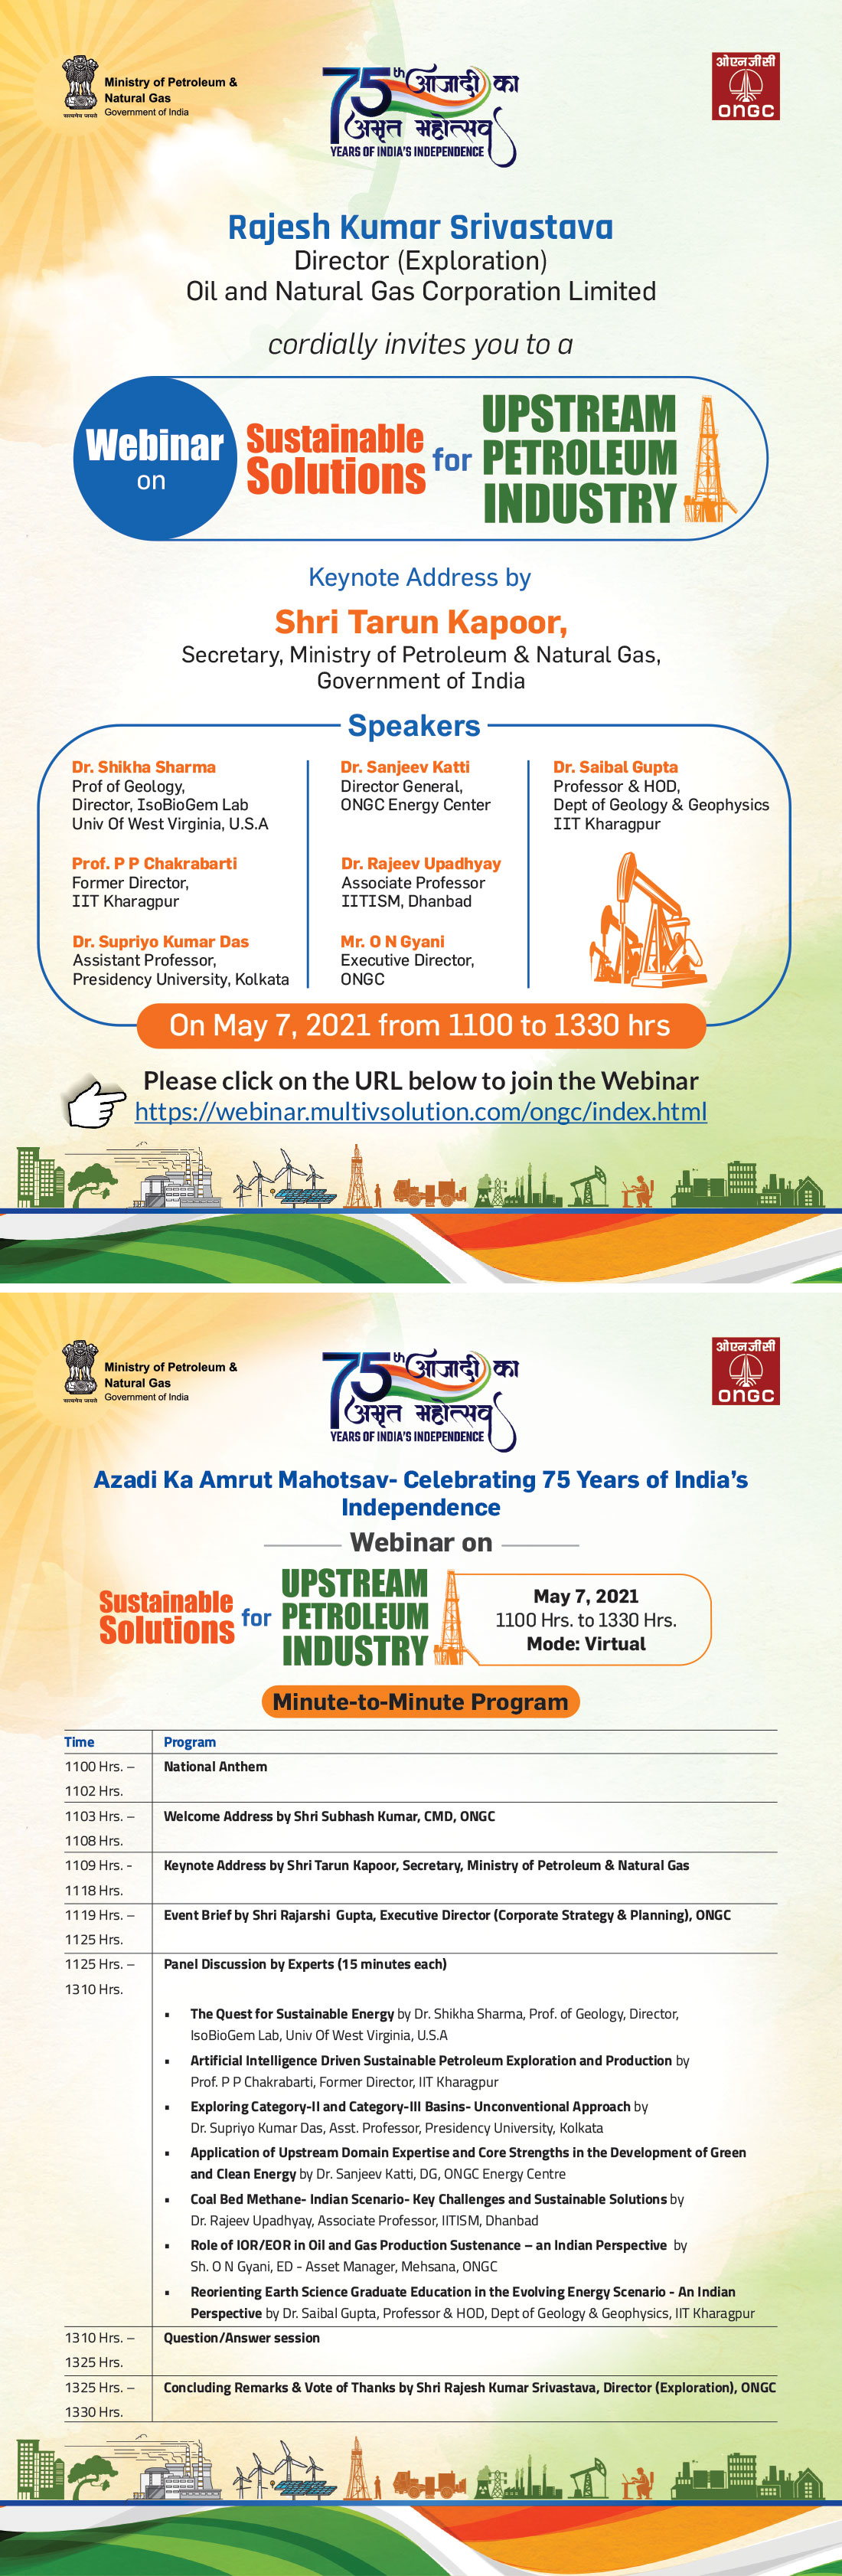 ONGC Webinar on Sustainable Solutions for Upstream Petroleum Industry